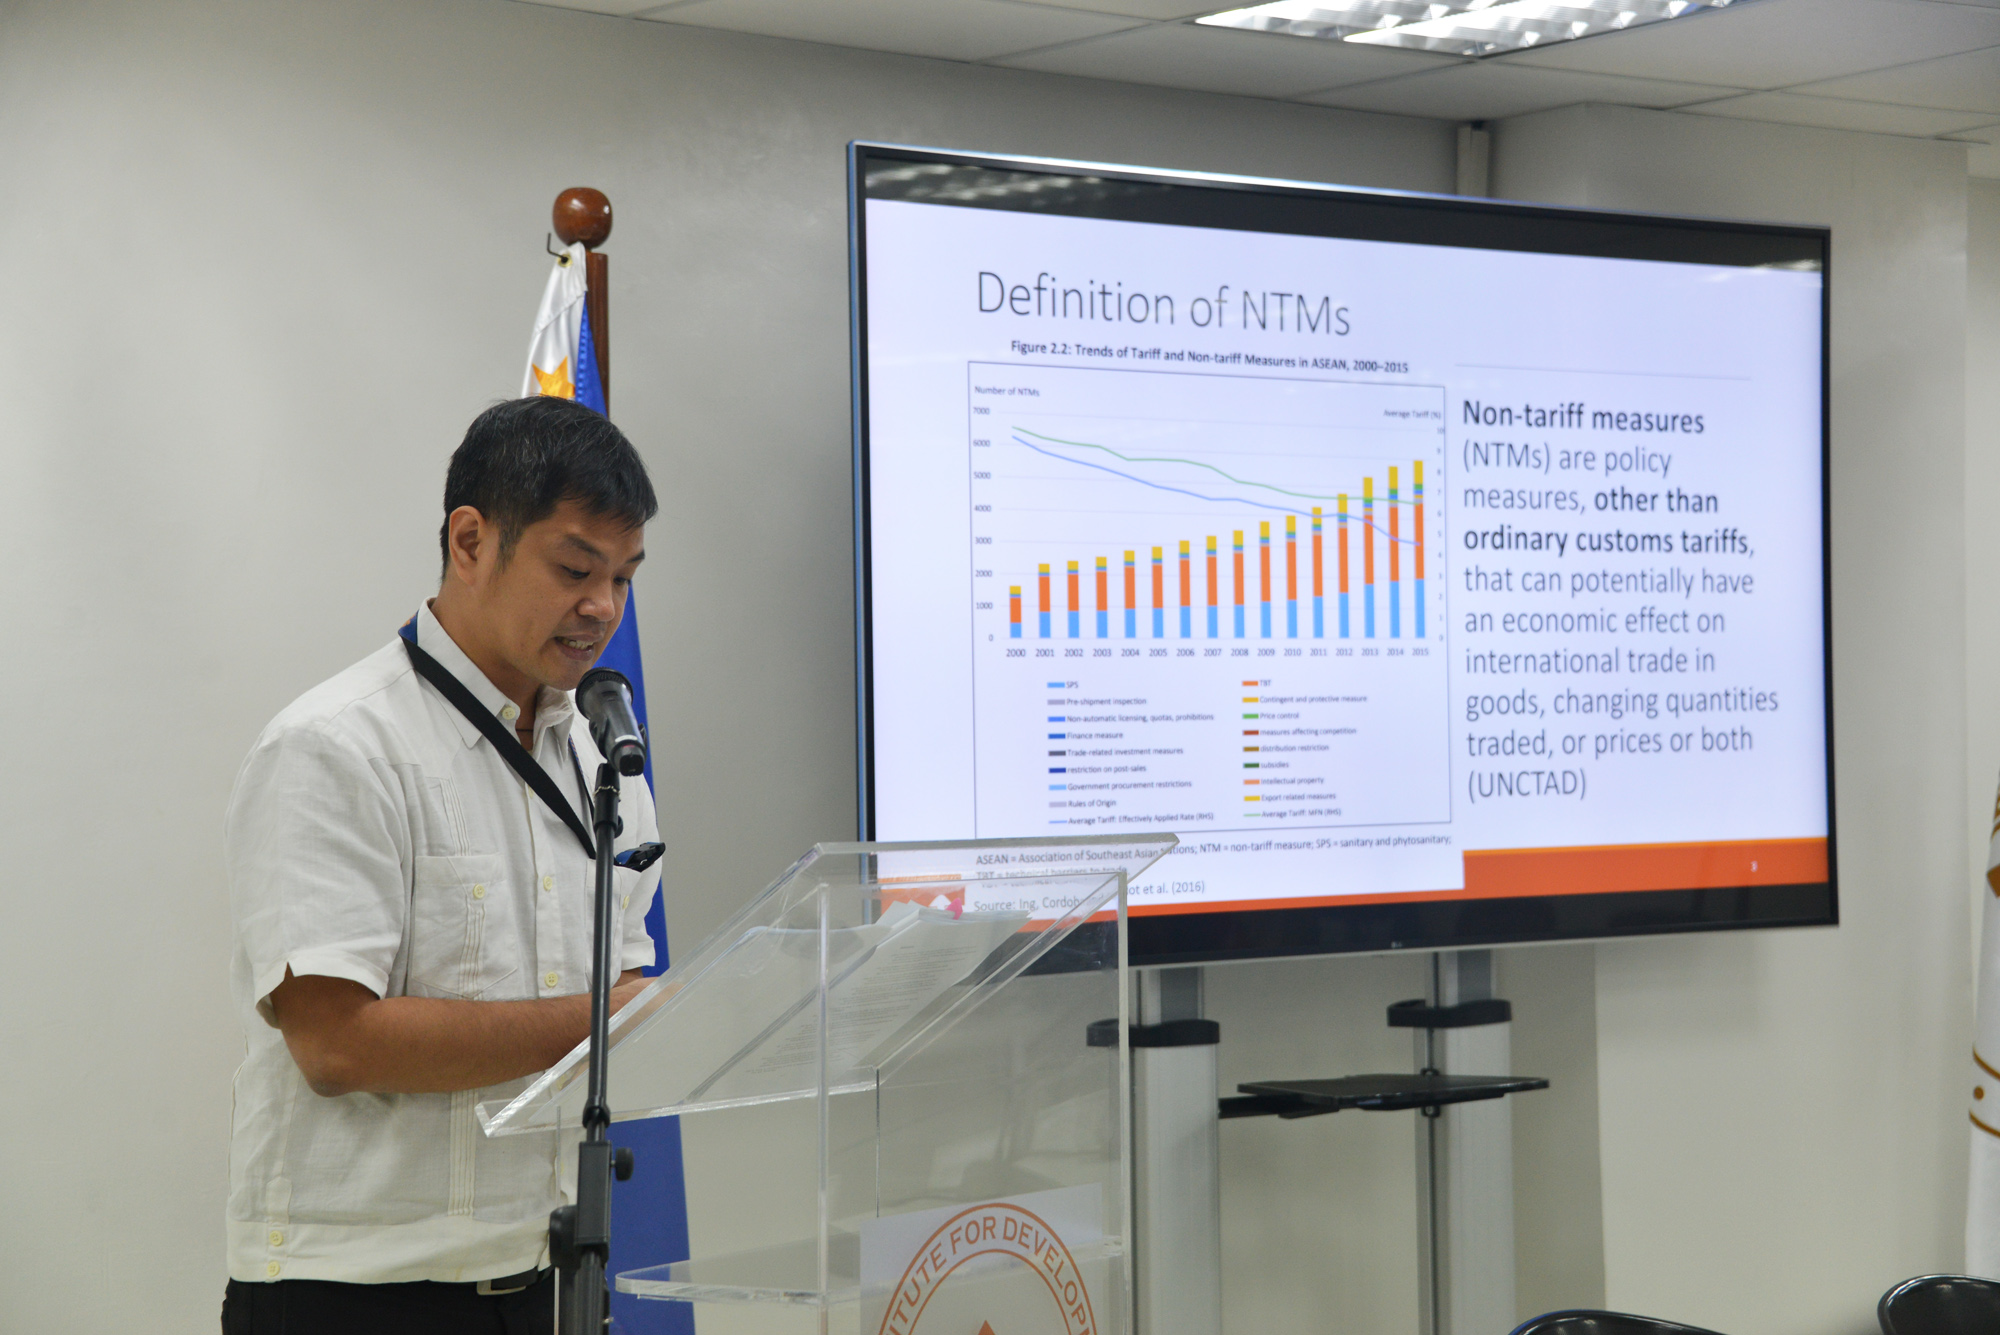 Public Seminar on Global Trade and SMEs-pids-tradesmes-4-20191016.jpg